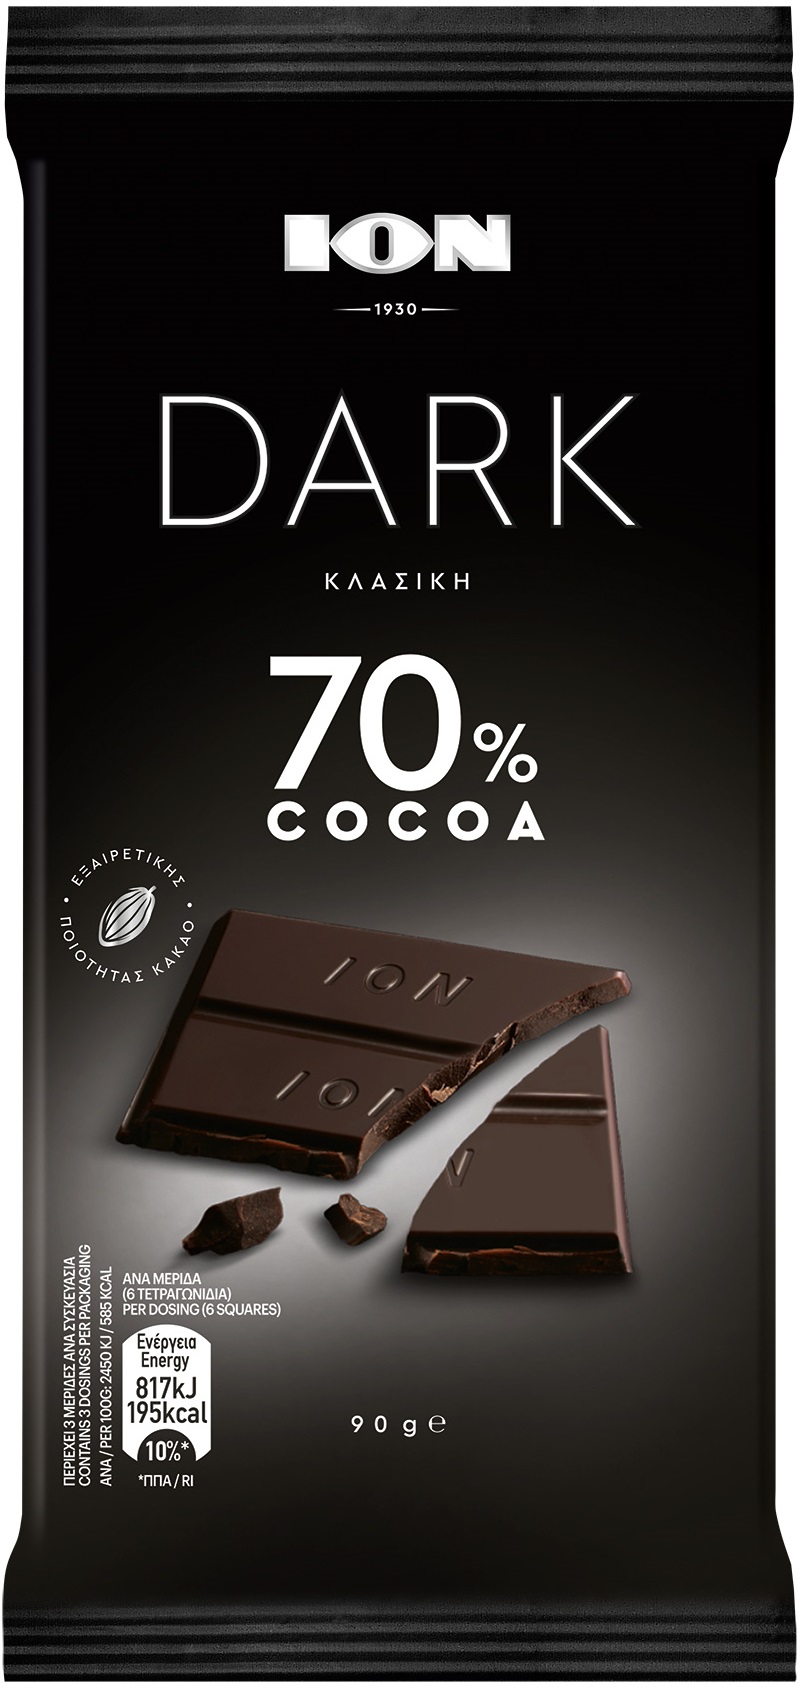 ION DARK 70 cocoa pack LOW